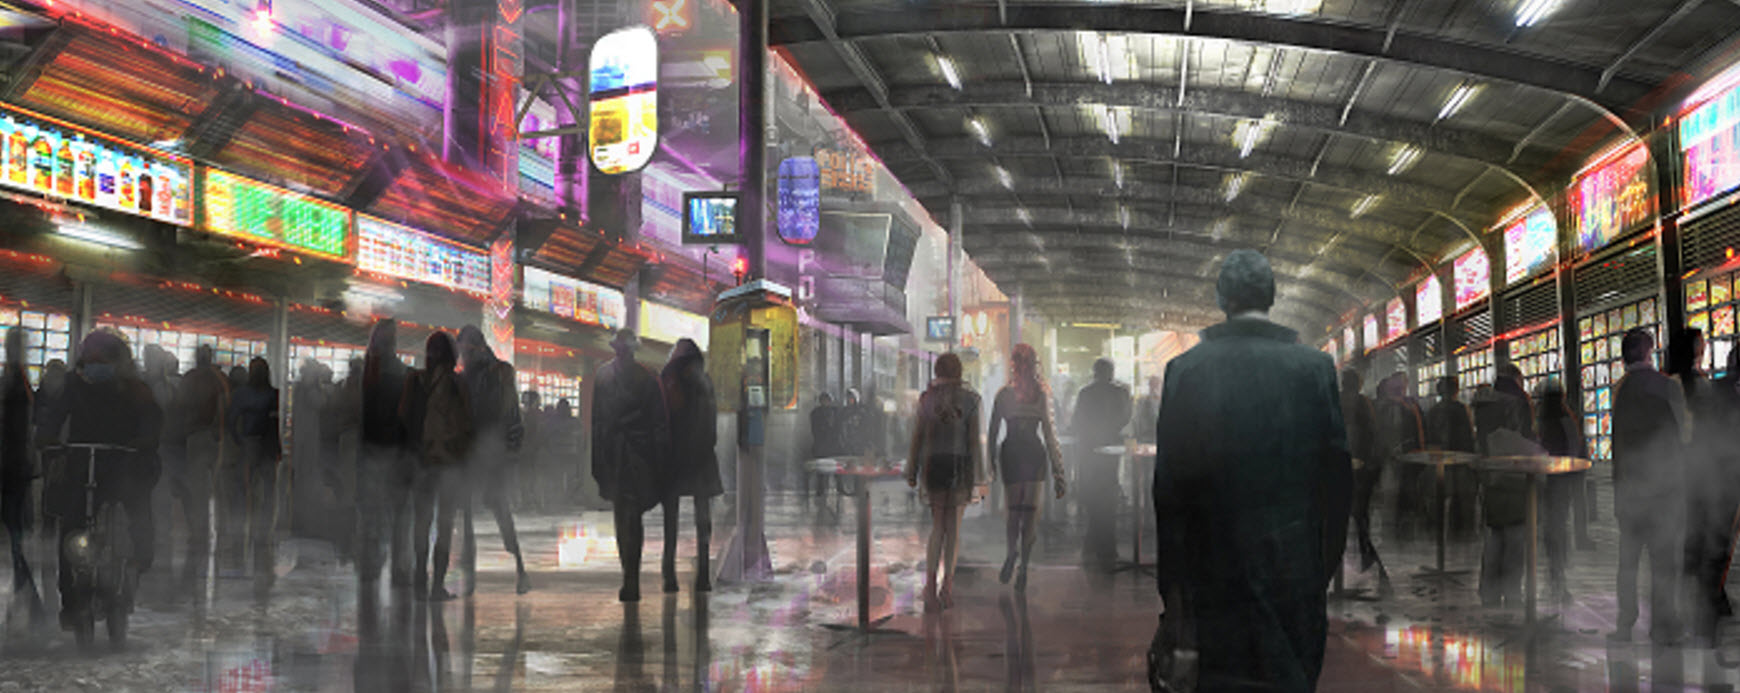  Concept art for the sequel of the cult film Blade Runner.